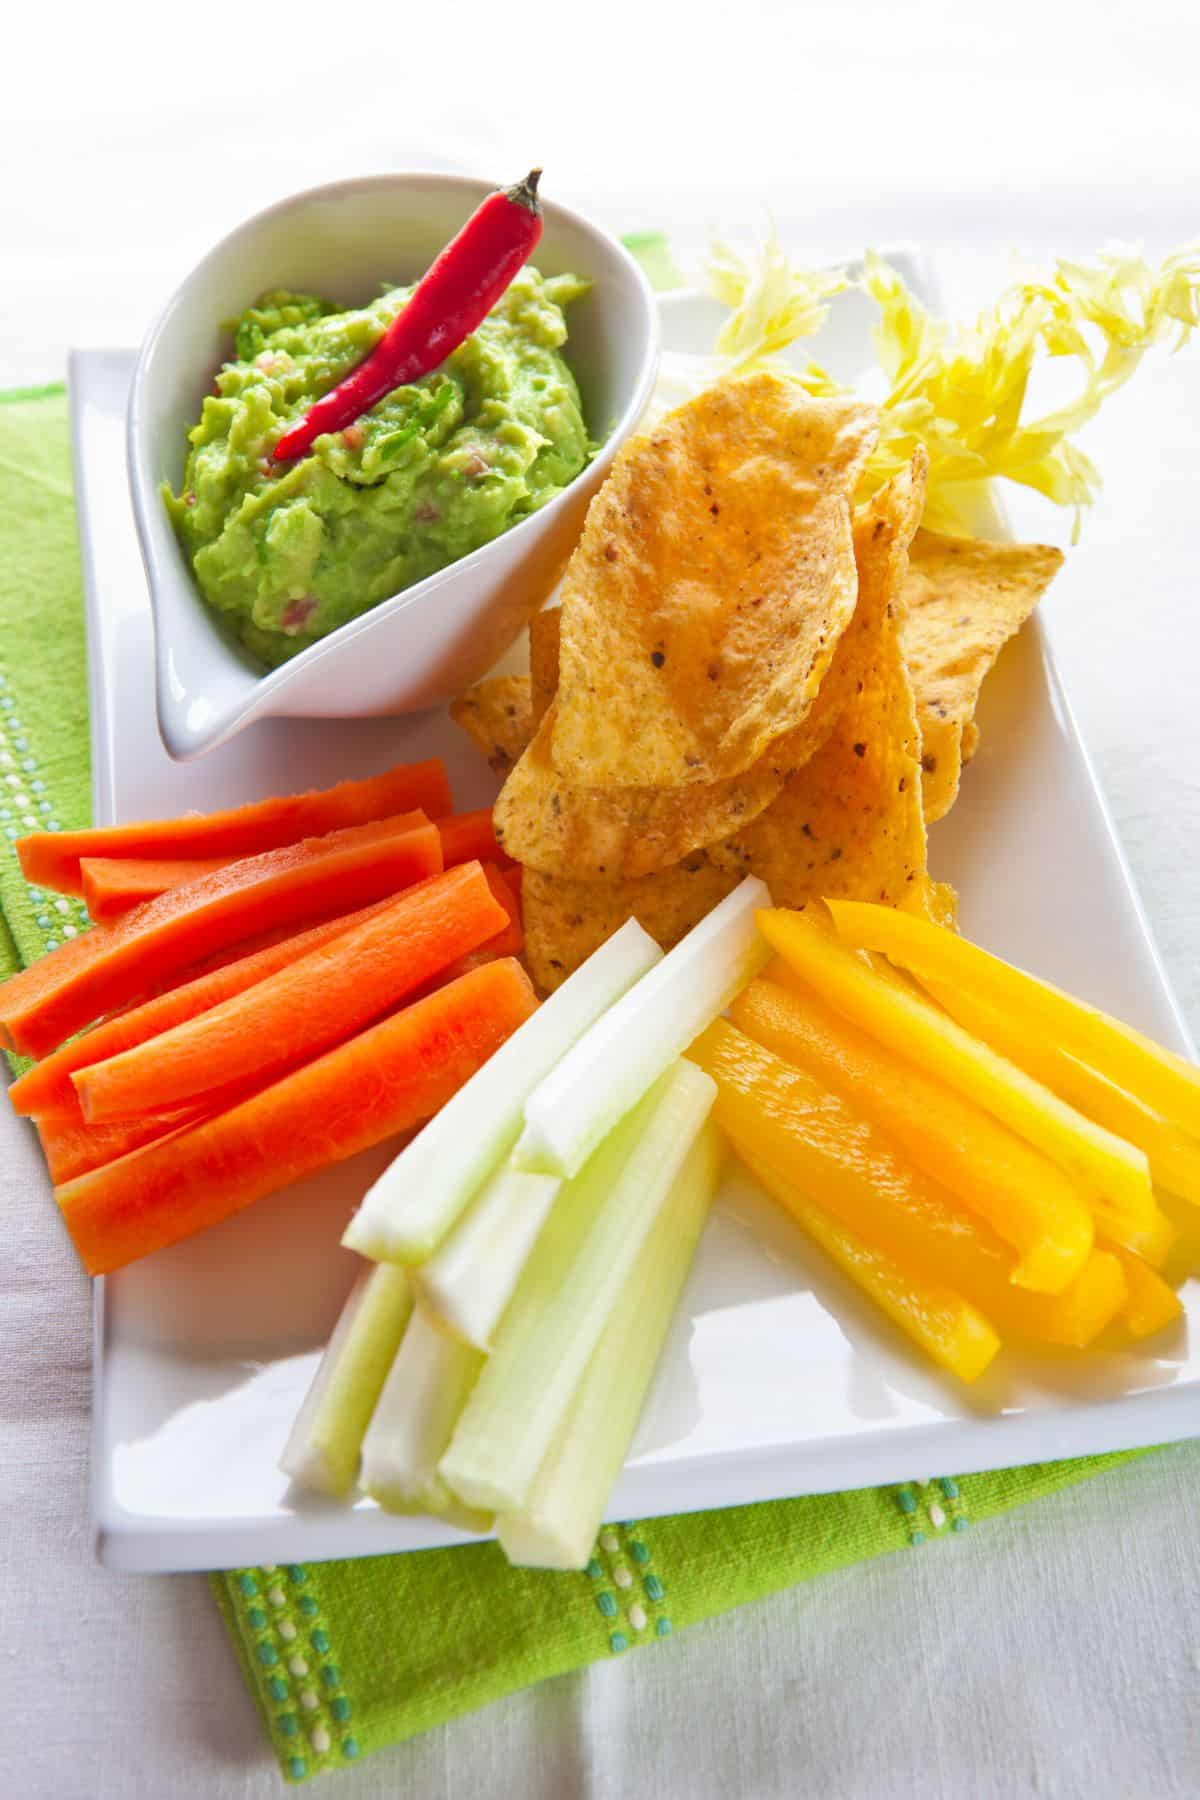 veggies served with guacamole.